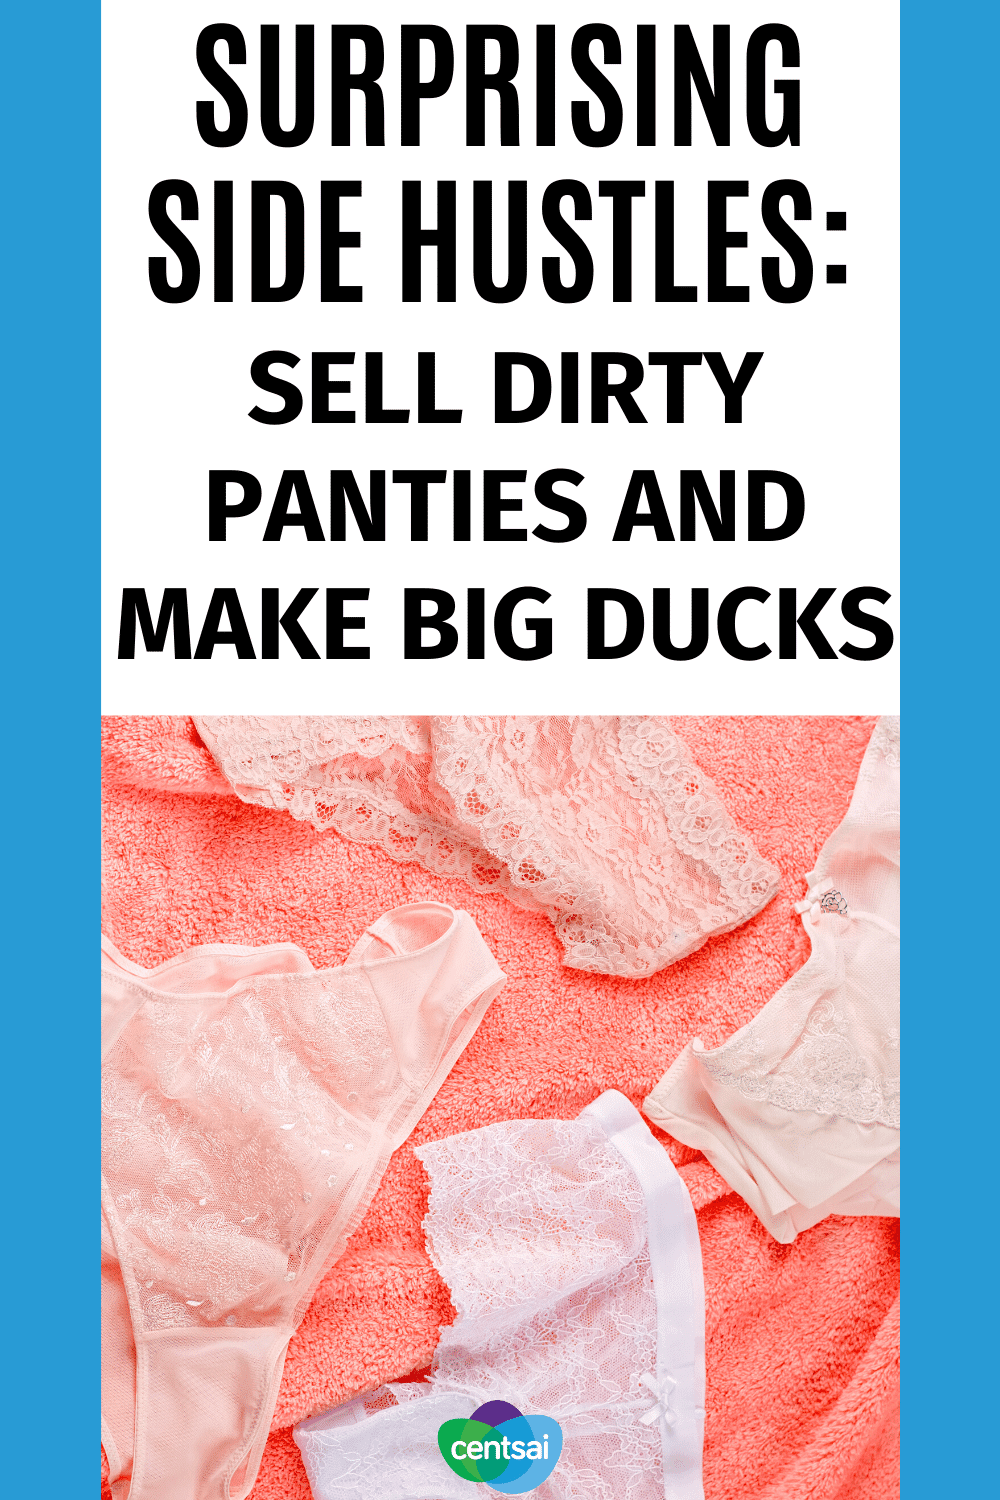 Sale for dirty pantys My Used